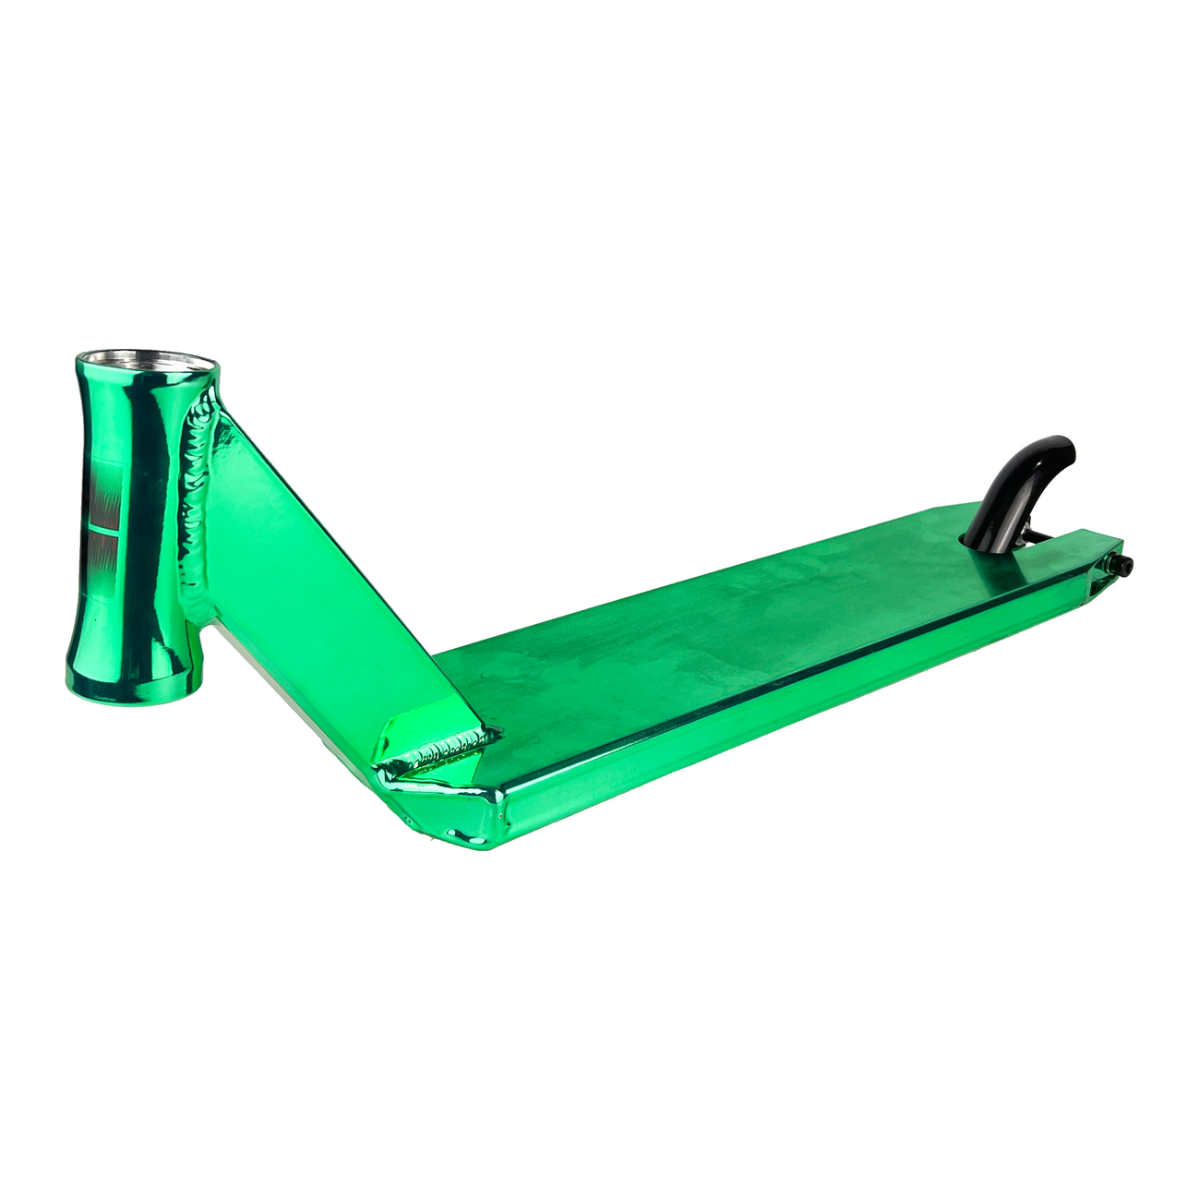 An image of Dominator Team Edition Scooter Deck - Green Chrome - 19.6" x 4.7"